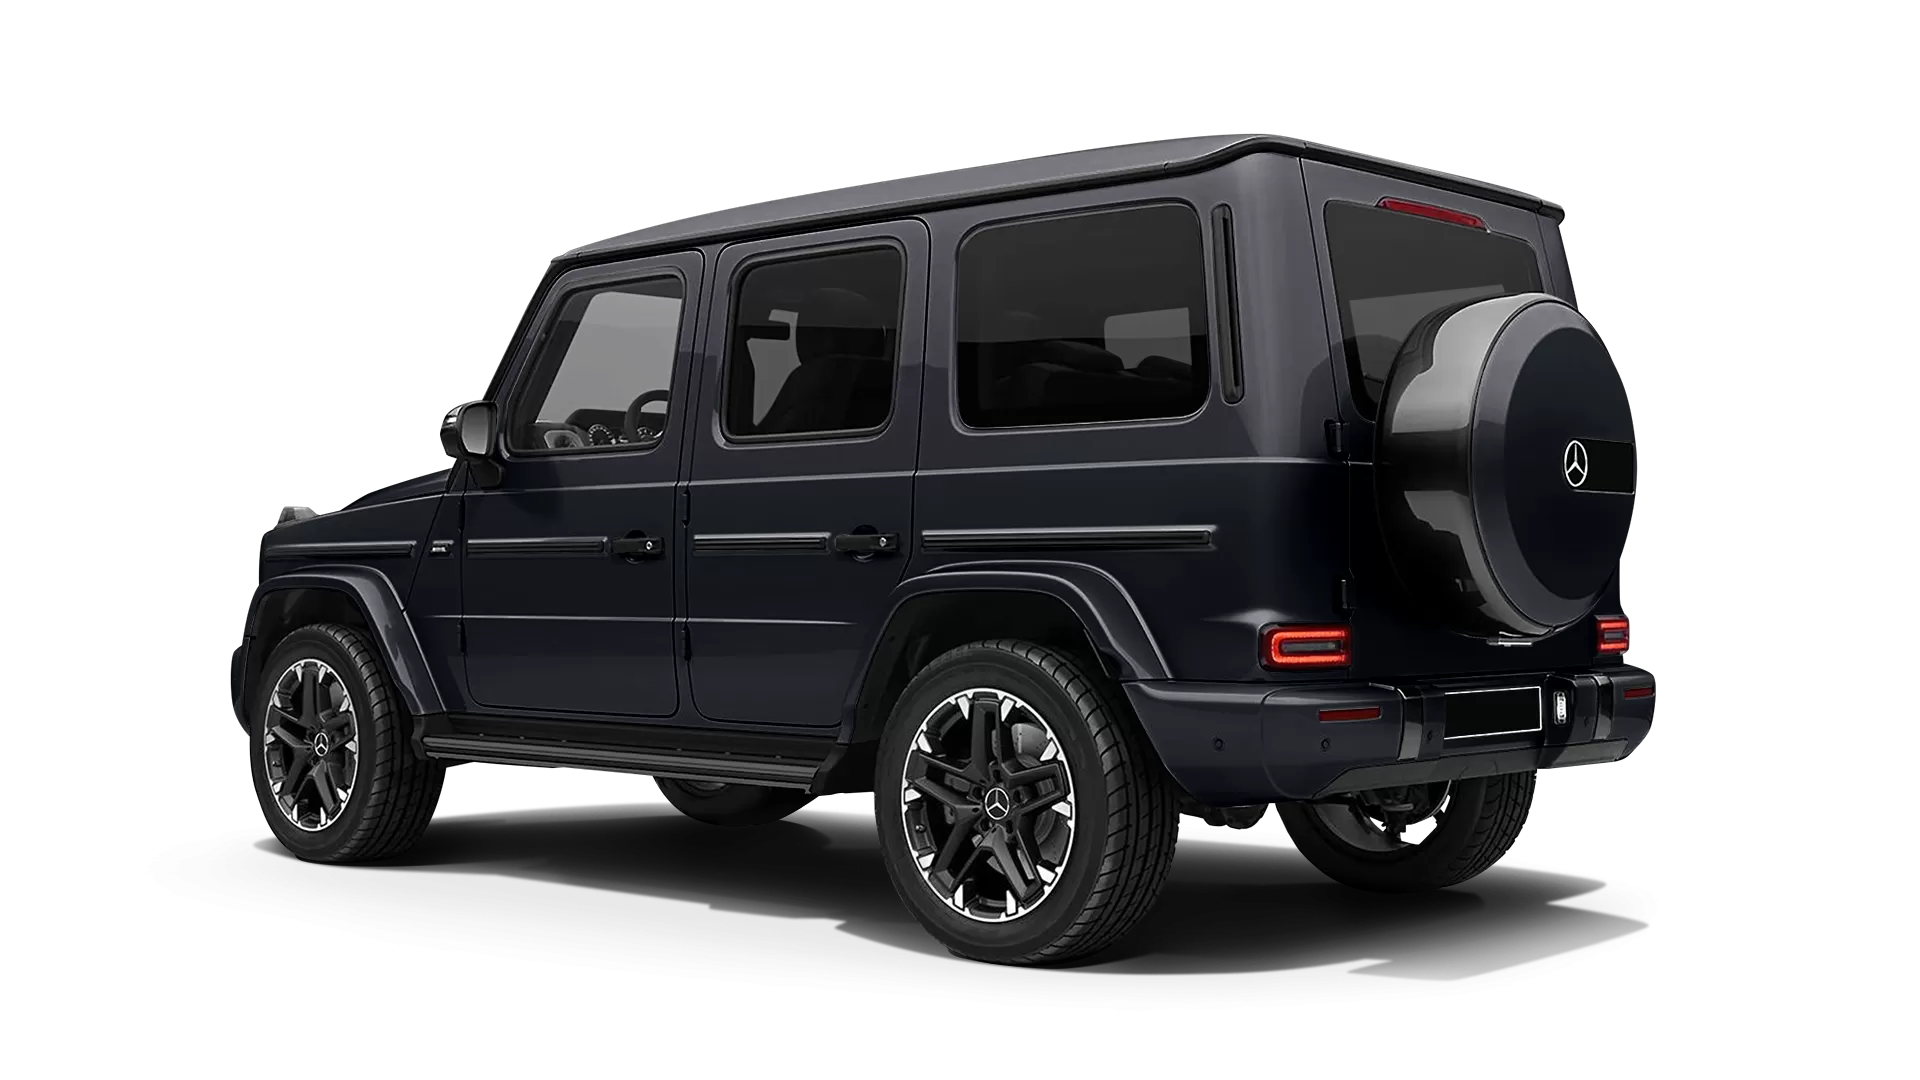 Mercedes G class W463 stock rear view in Obsidian Black color